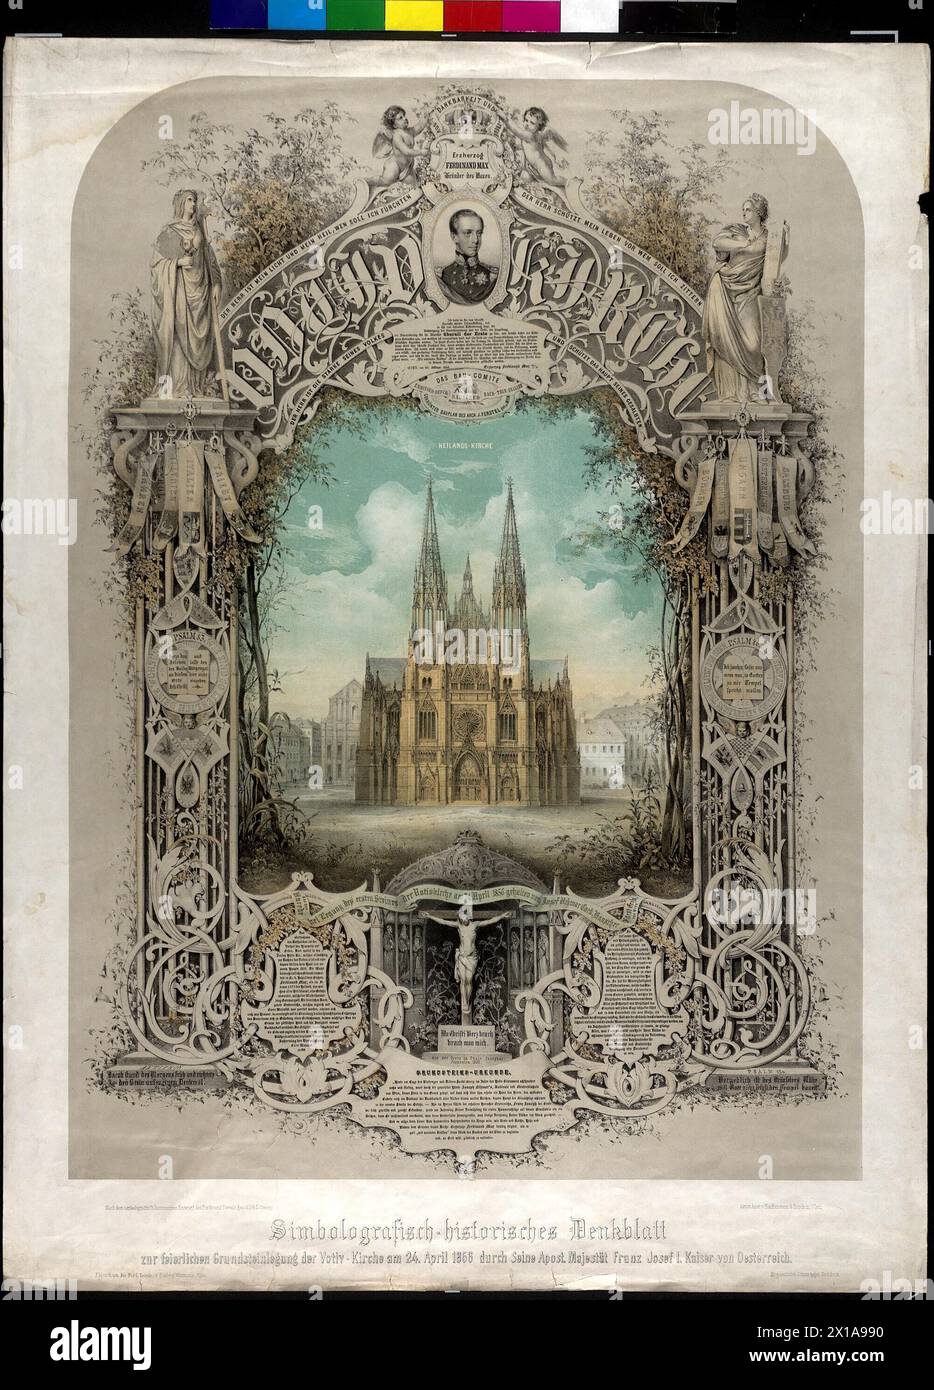 Commemorative paper to the laying of the foundation stone of the votive church in Vienna at 24.4.1856 by emperor Franz Joseph I, view of the of Harry von Ferstel schedule votive church in proliferative ornamented converting to Gothic border. in this health himself the portrait of the founder archduke Ferdinand Maximilian, the statue of the allegory of the Glauens and of the Austria, the flags and coat of arms of the Kronlaender and singular cities, as soon as a crucifix. furthermore were many text on the midrib, as psalm or the speech of cardinal tremolo on the occasion of of the laying of the Stock Photo